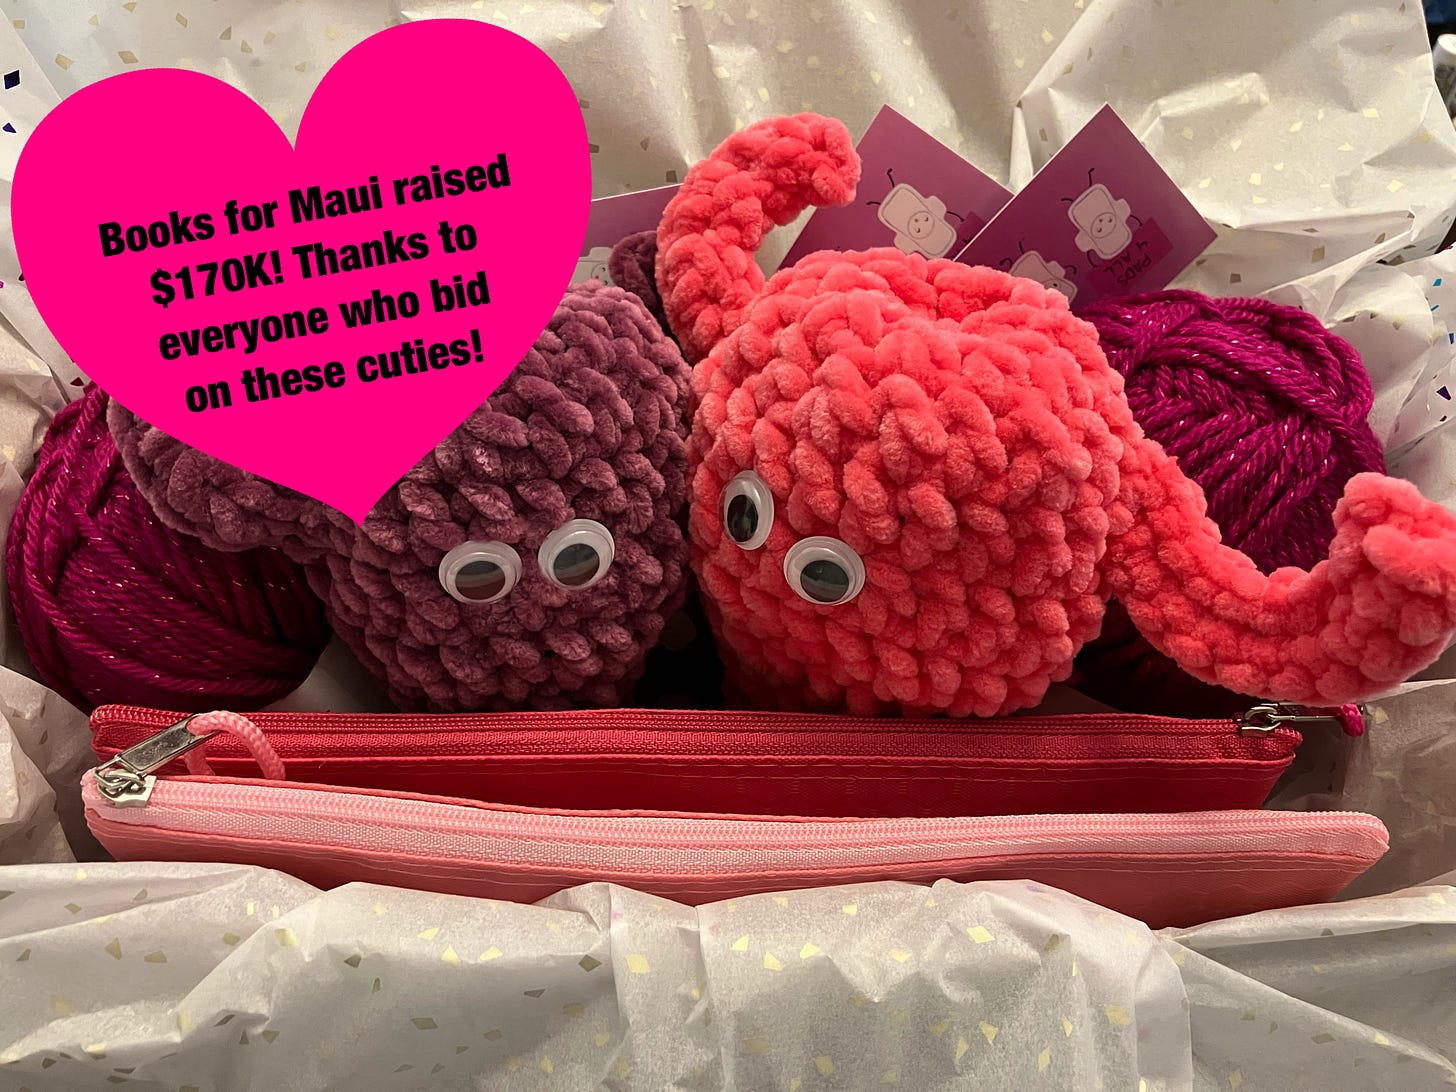 crochet cuteruses uteruses crochet kits and more wrapped in sparkle tissue paper and boxed to ship to the winning donor